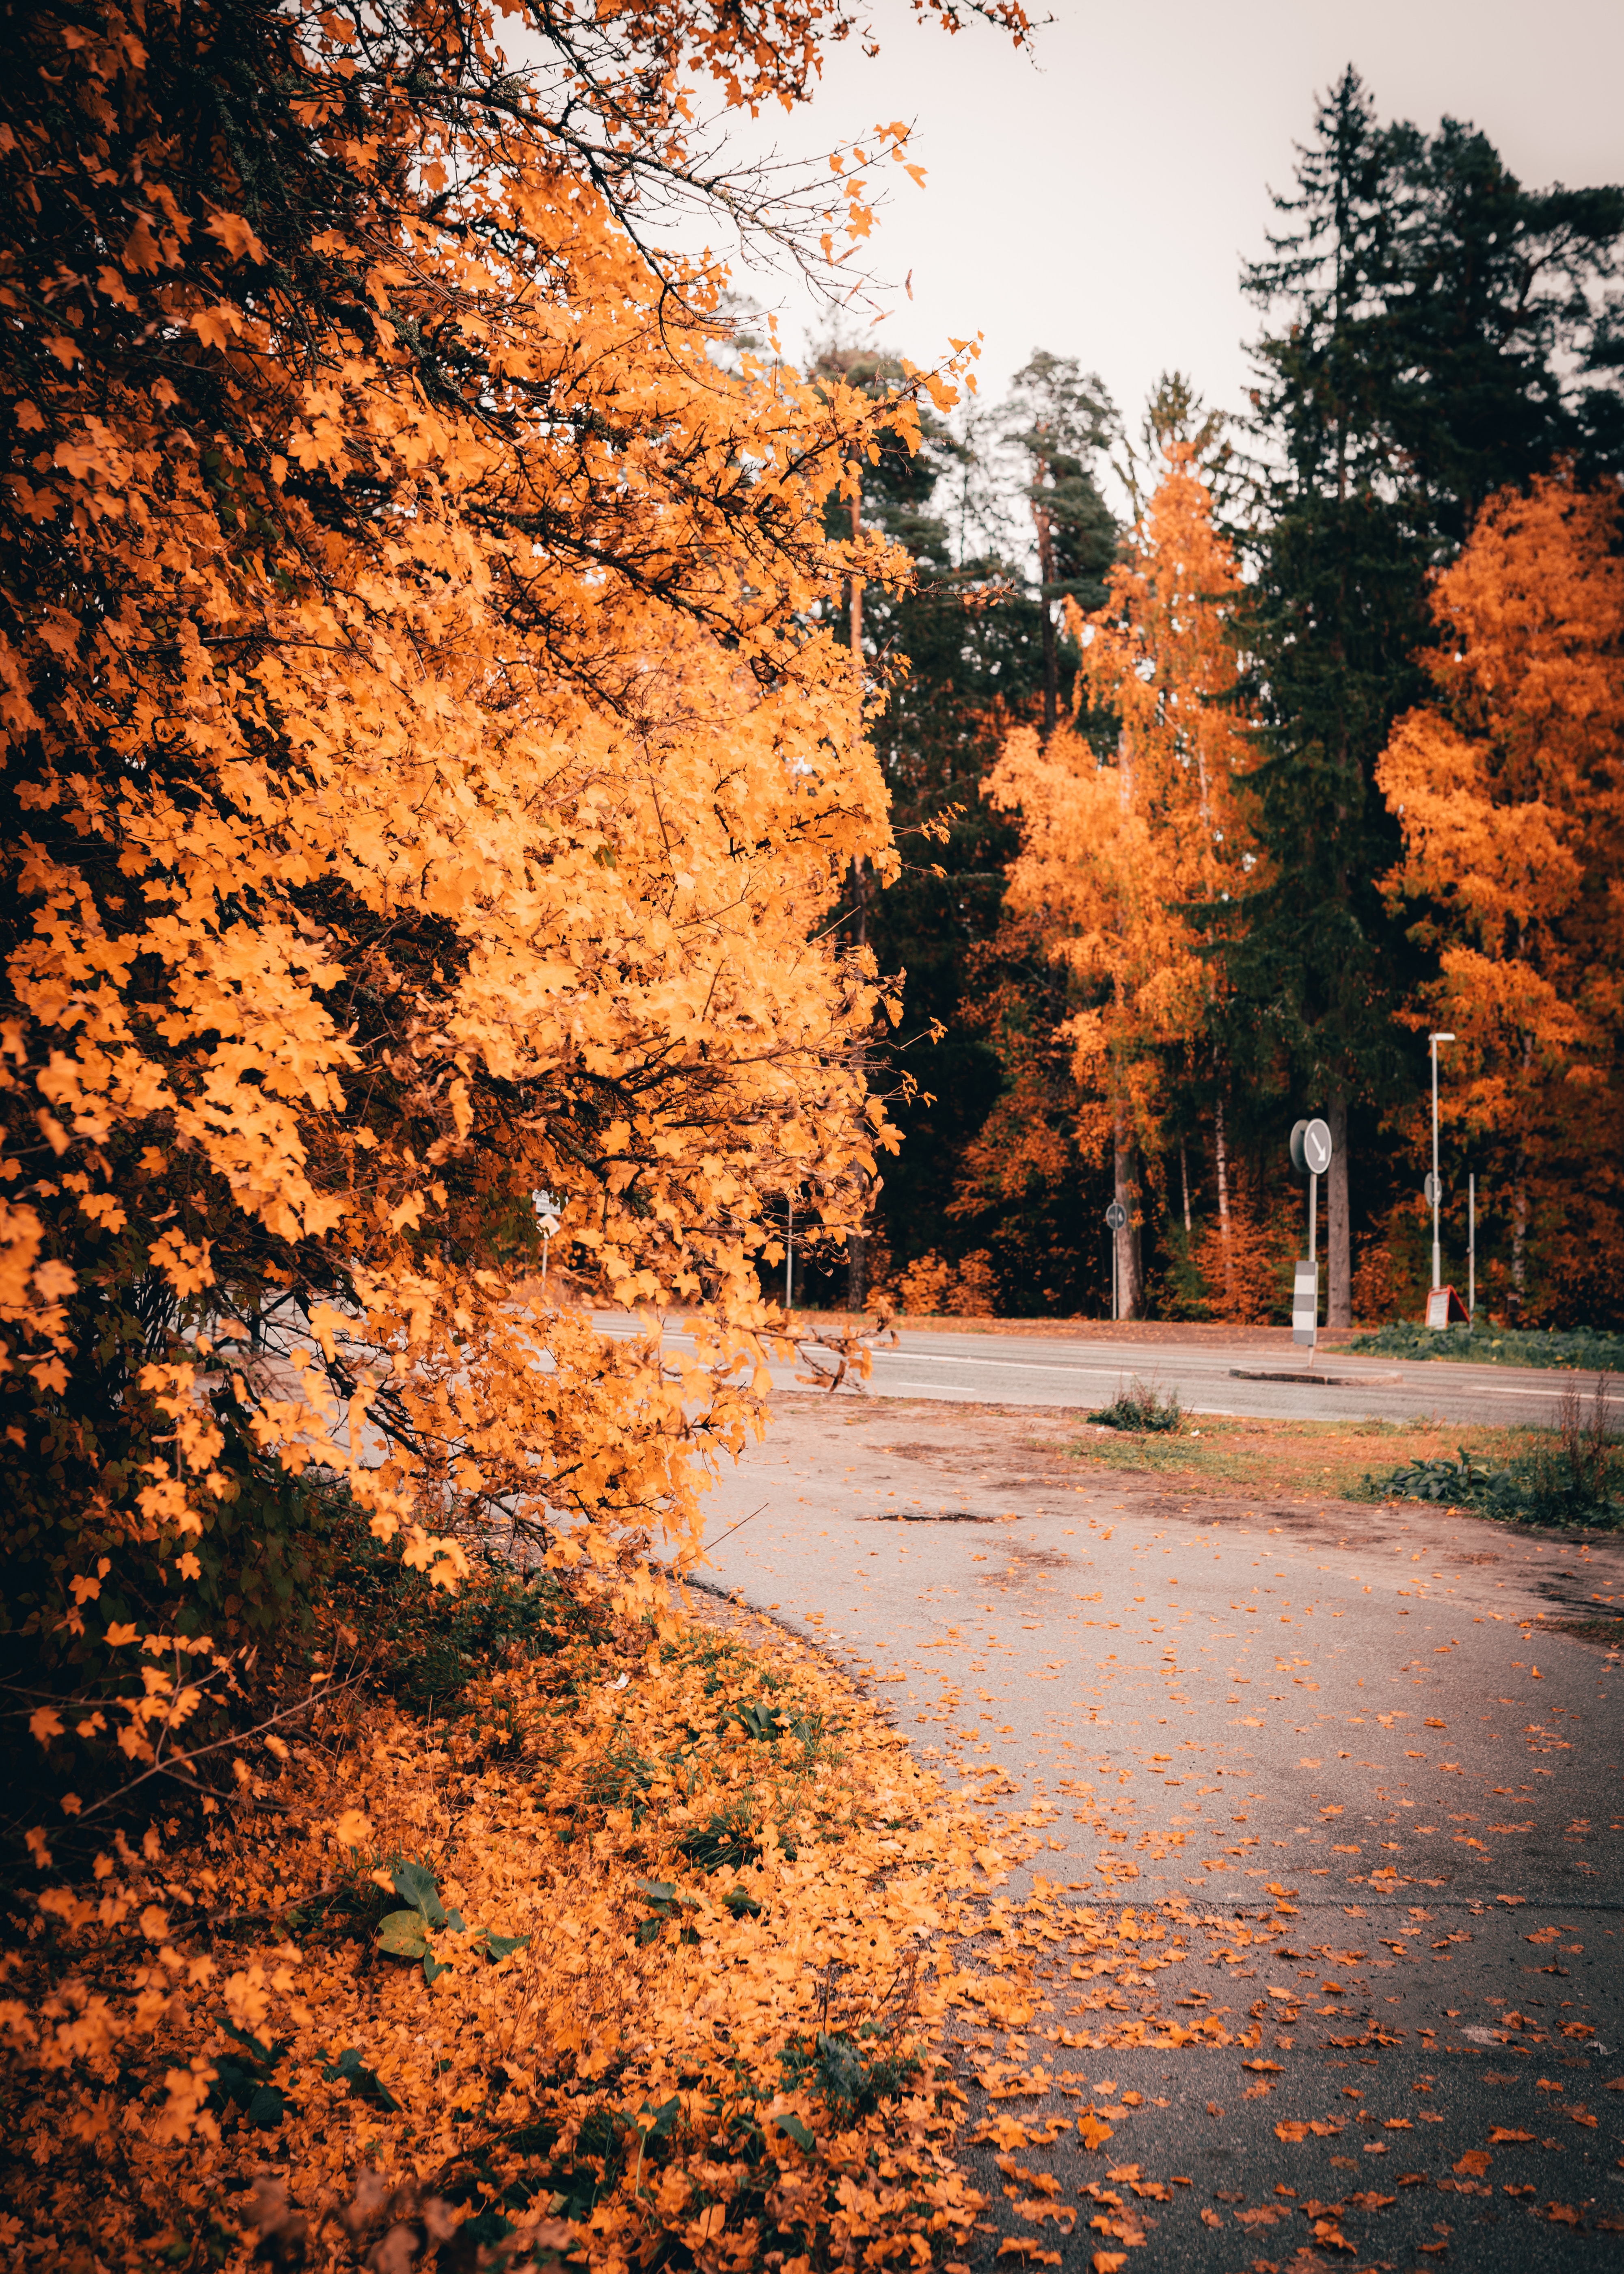 autumn, road, foliage, nature, trees, yellow High Definition image